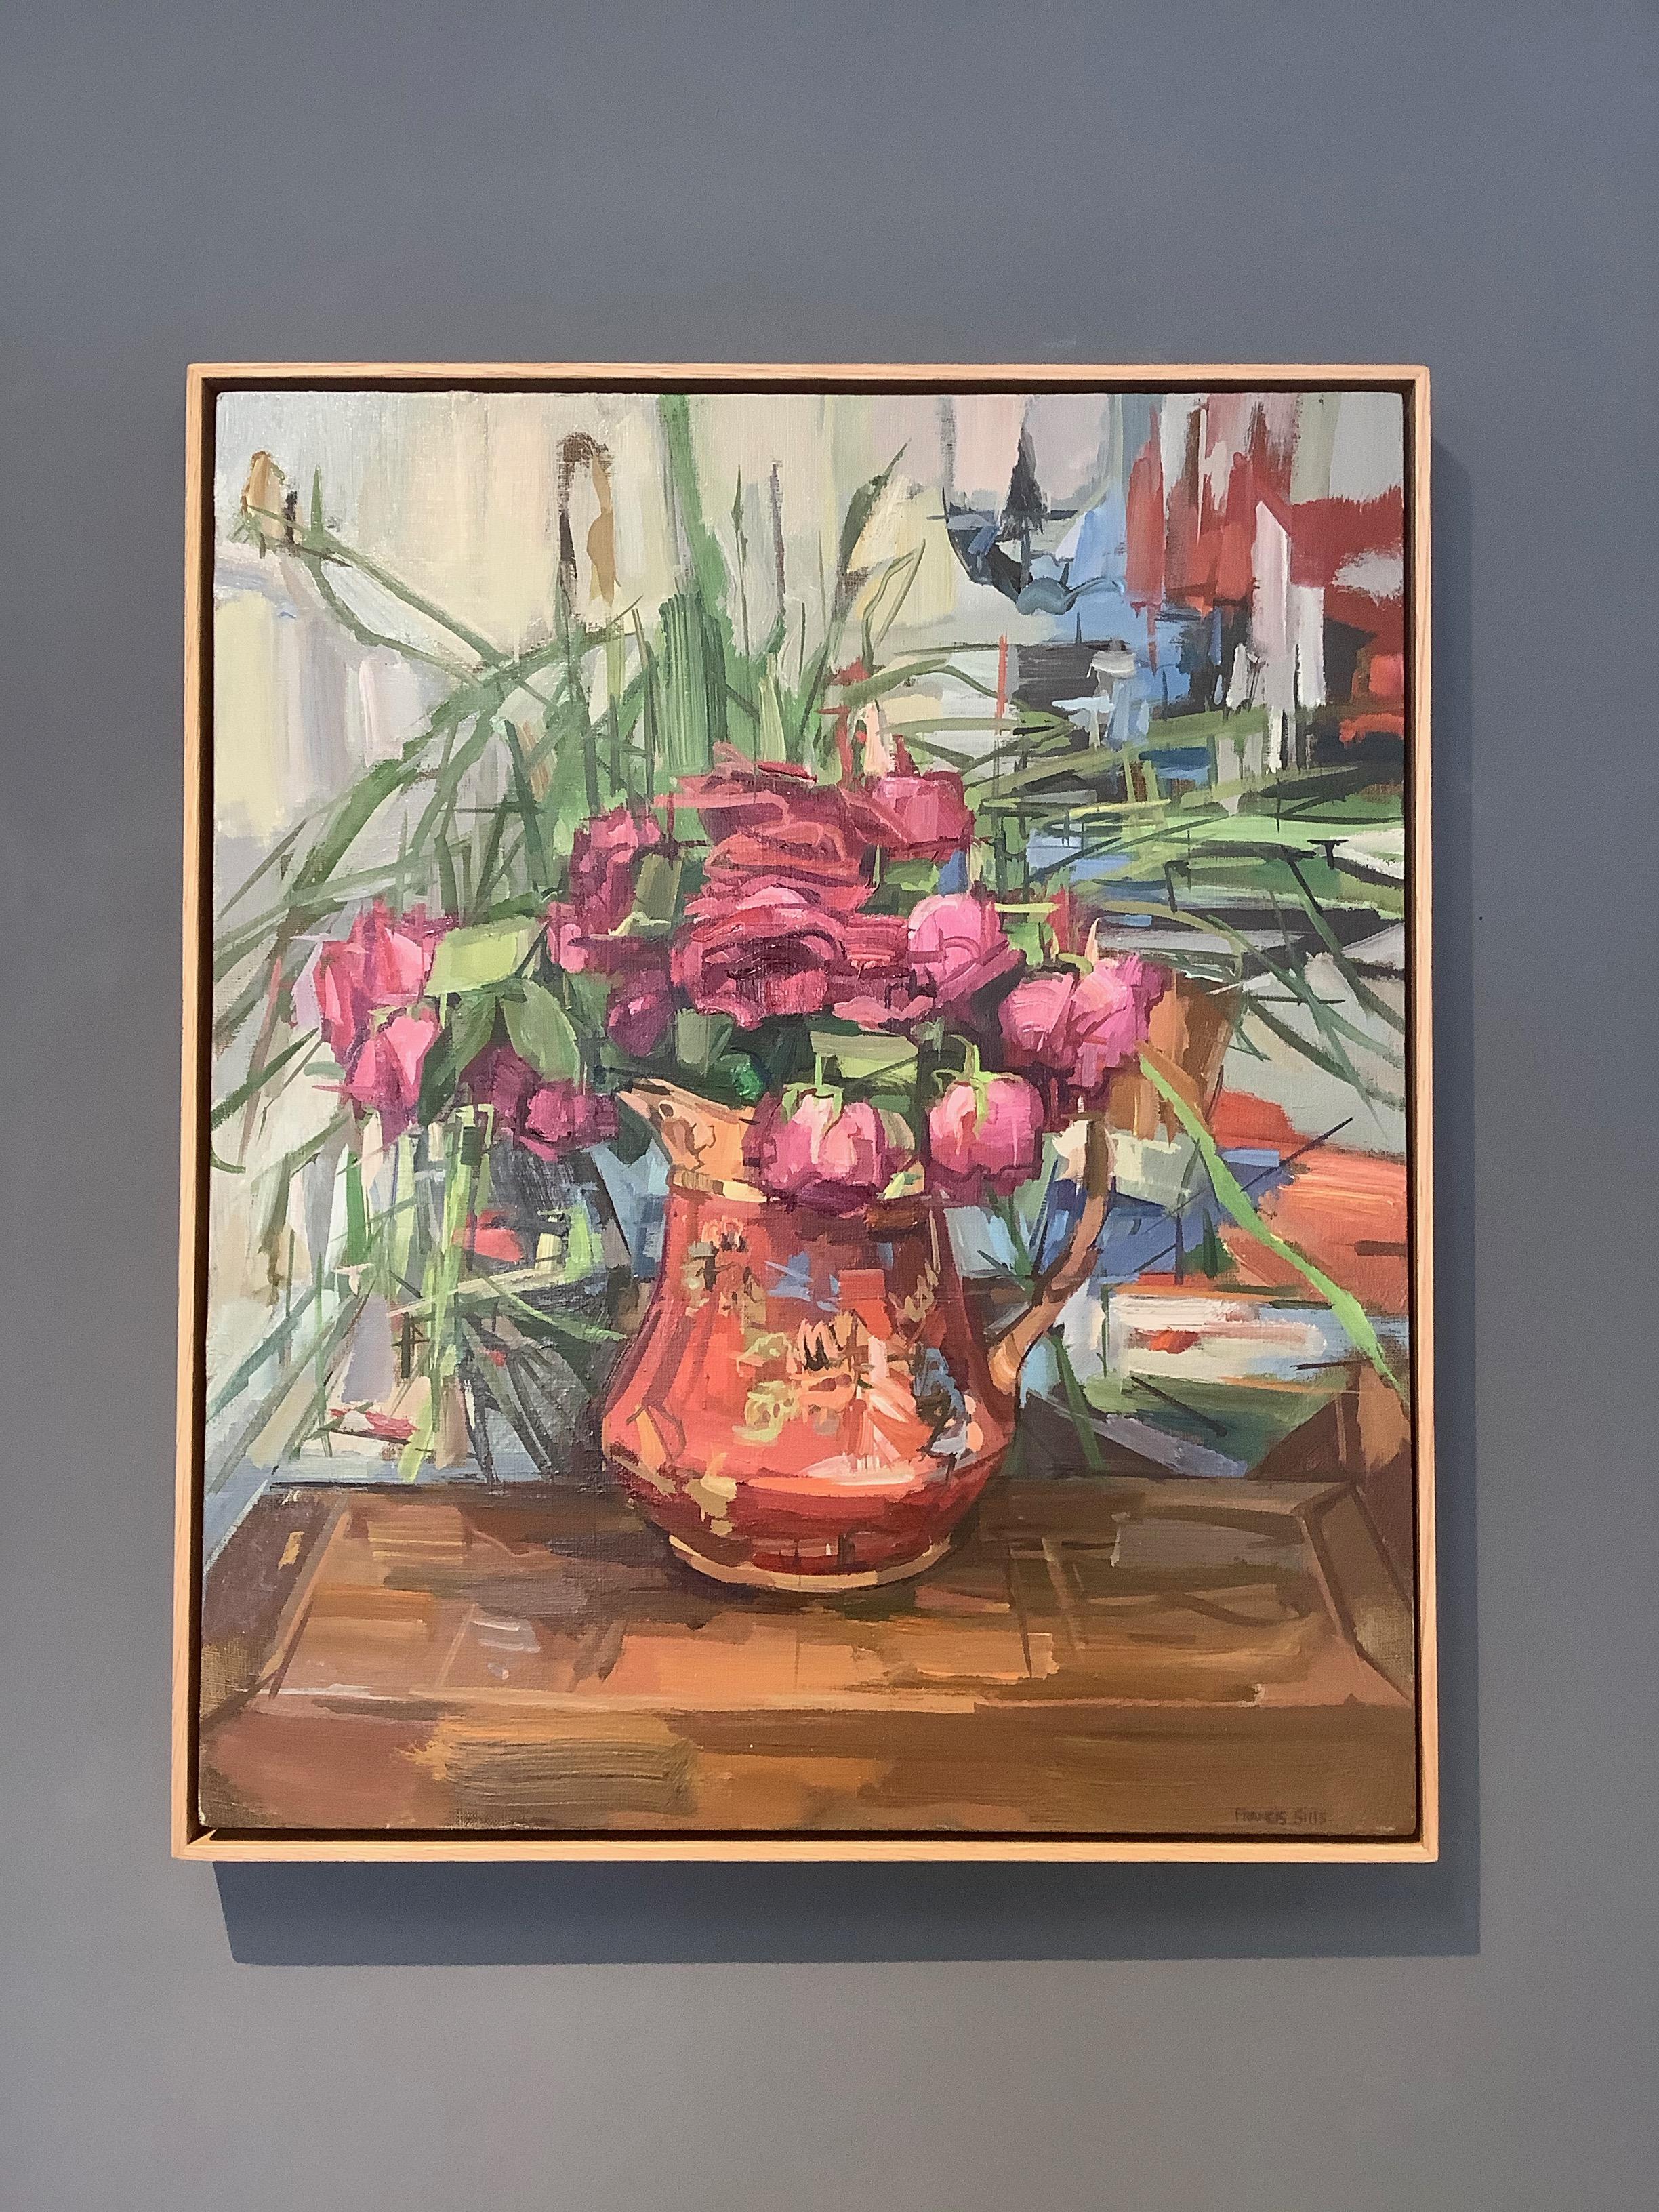 Roses, Botanical, Red, Dark Pink Flowers, Green, Floral Pitcher on Wooden Table - Painting by Francis Sills